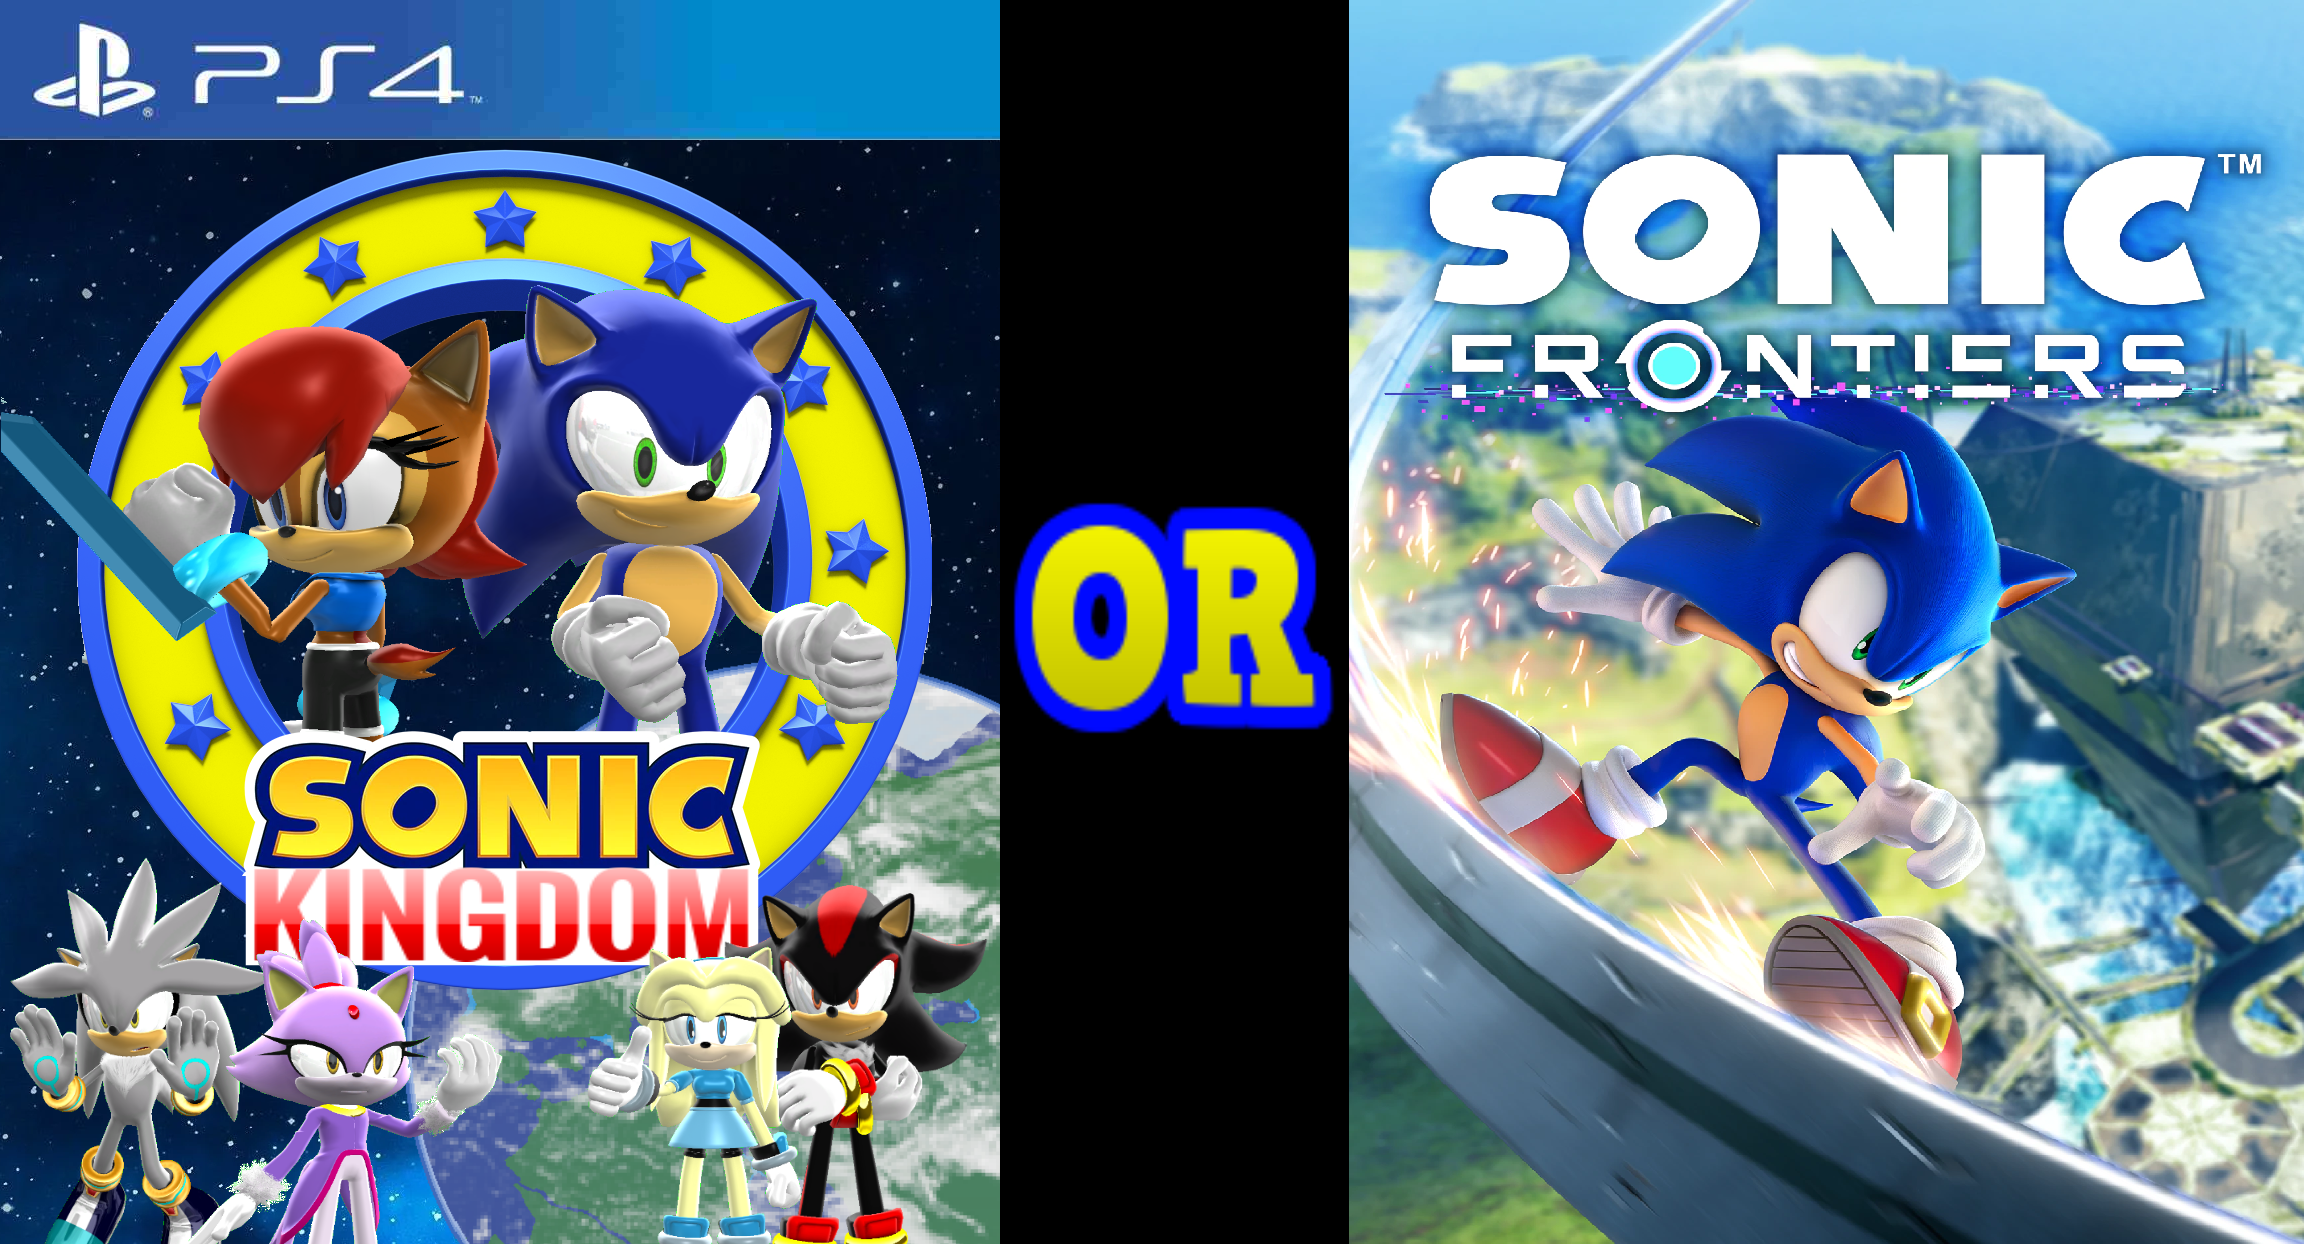 If Sonic Frontiers had a Christmas DLC